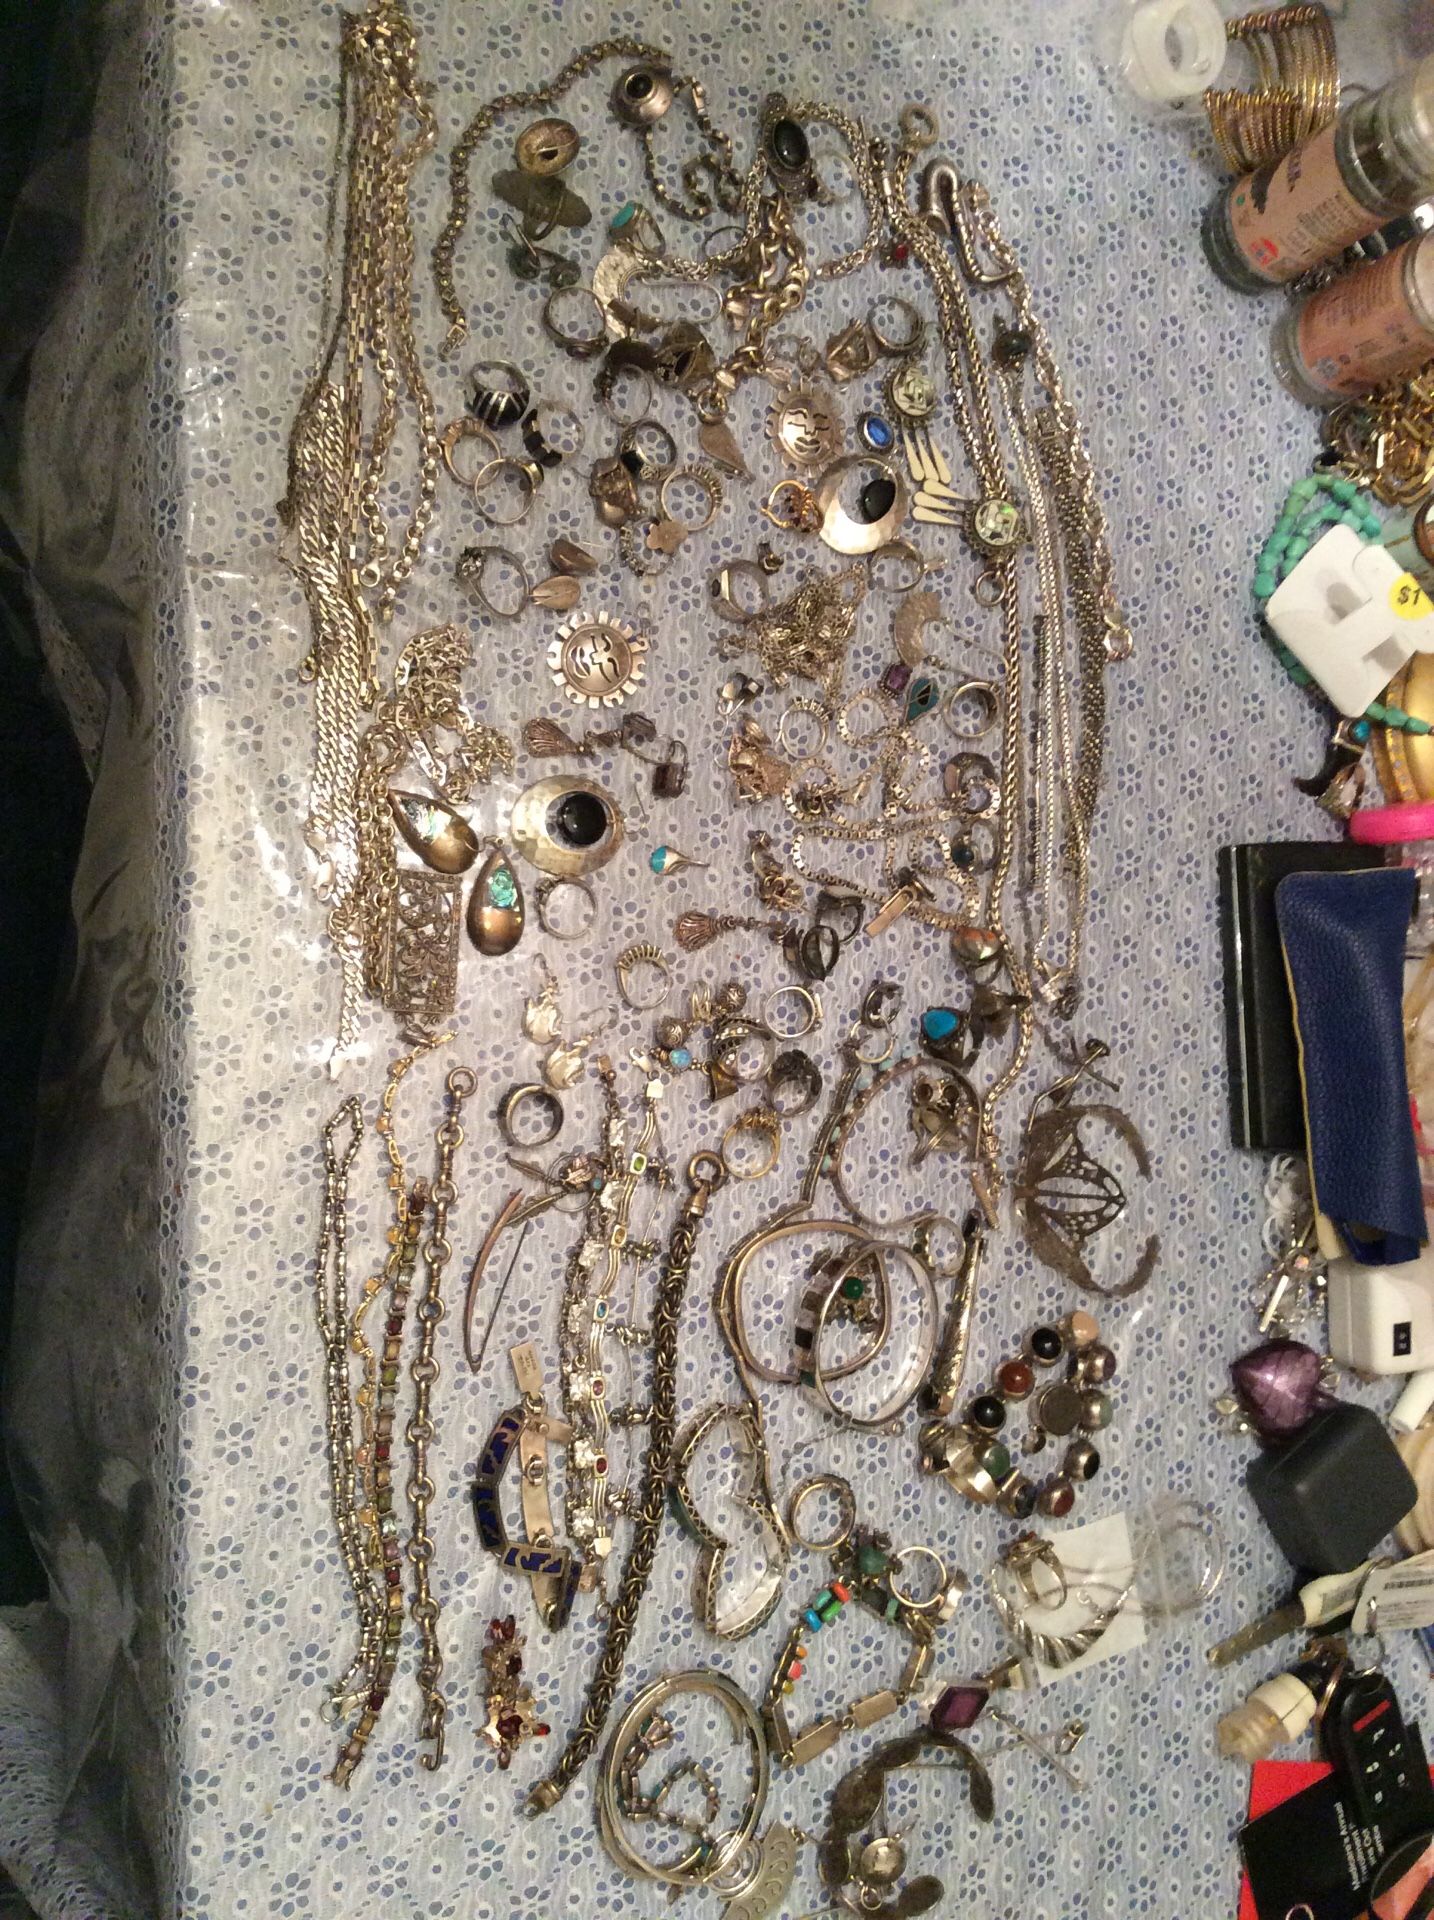 All vintage sterling silver jewelry.